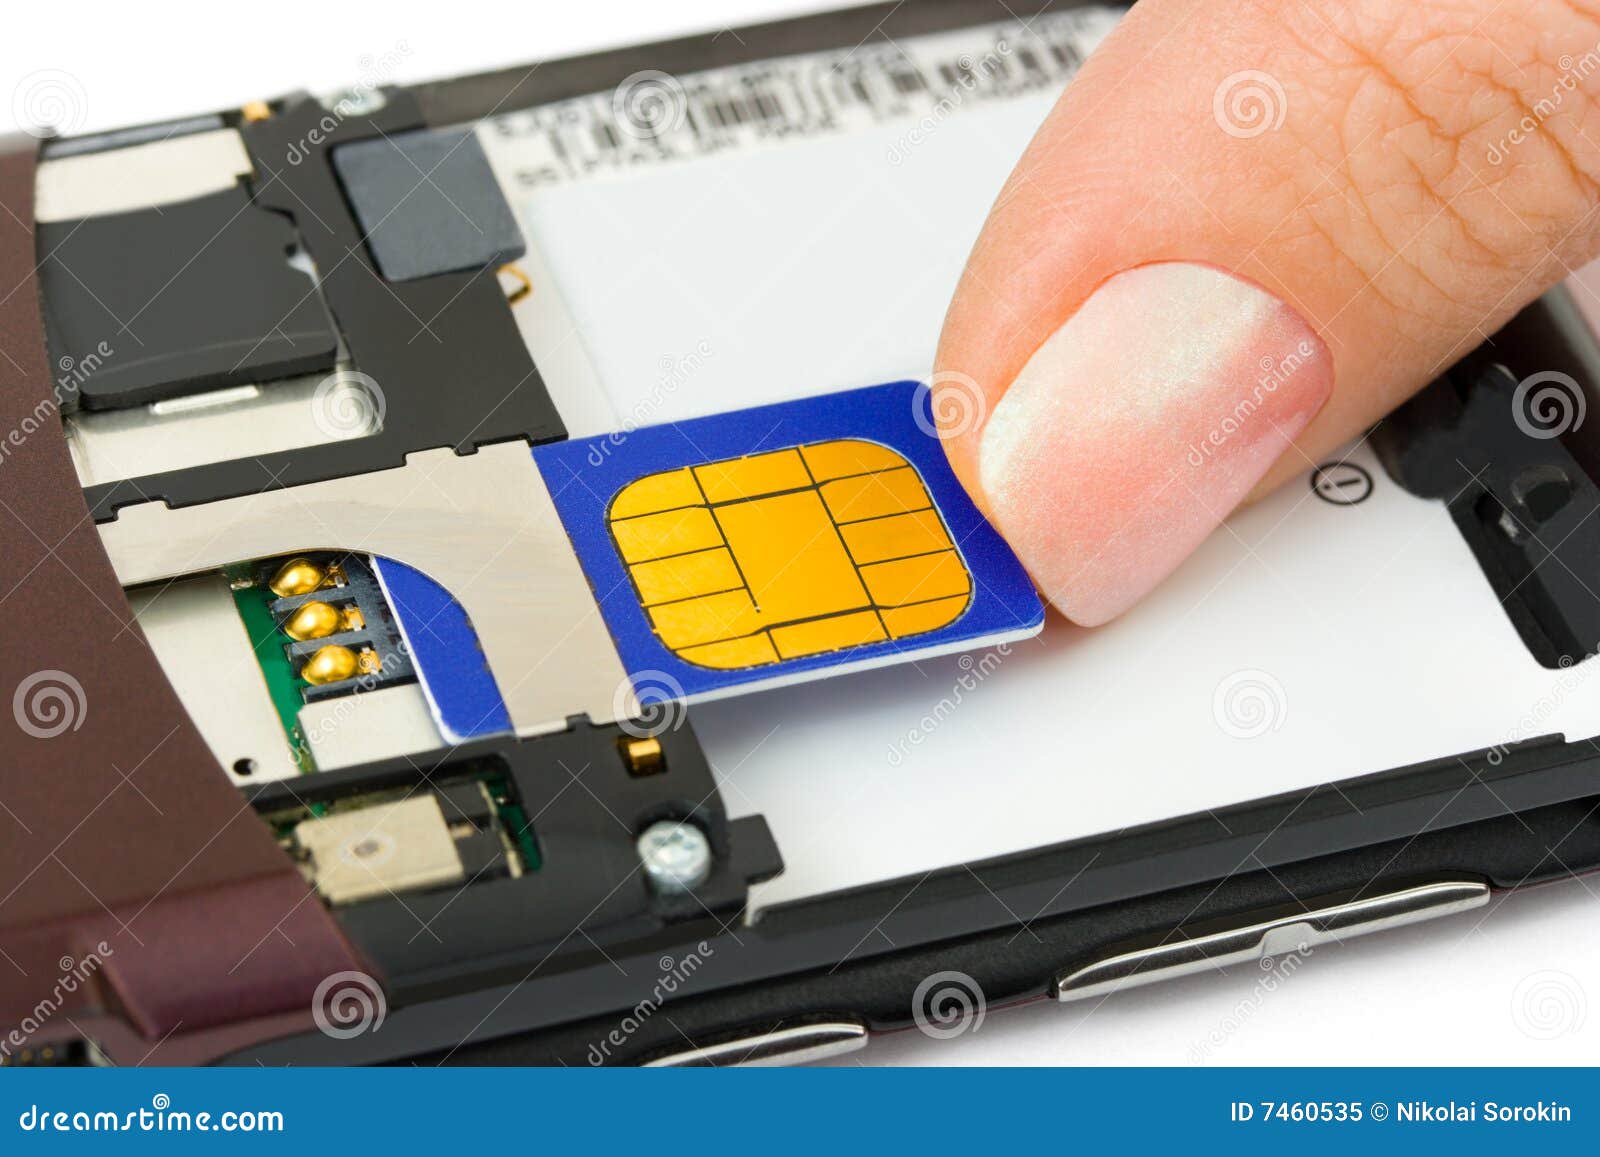 Hand Install Sim Card To Mobile Phone Stock Image Image Of Finger